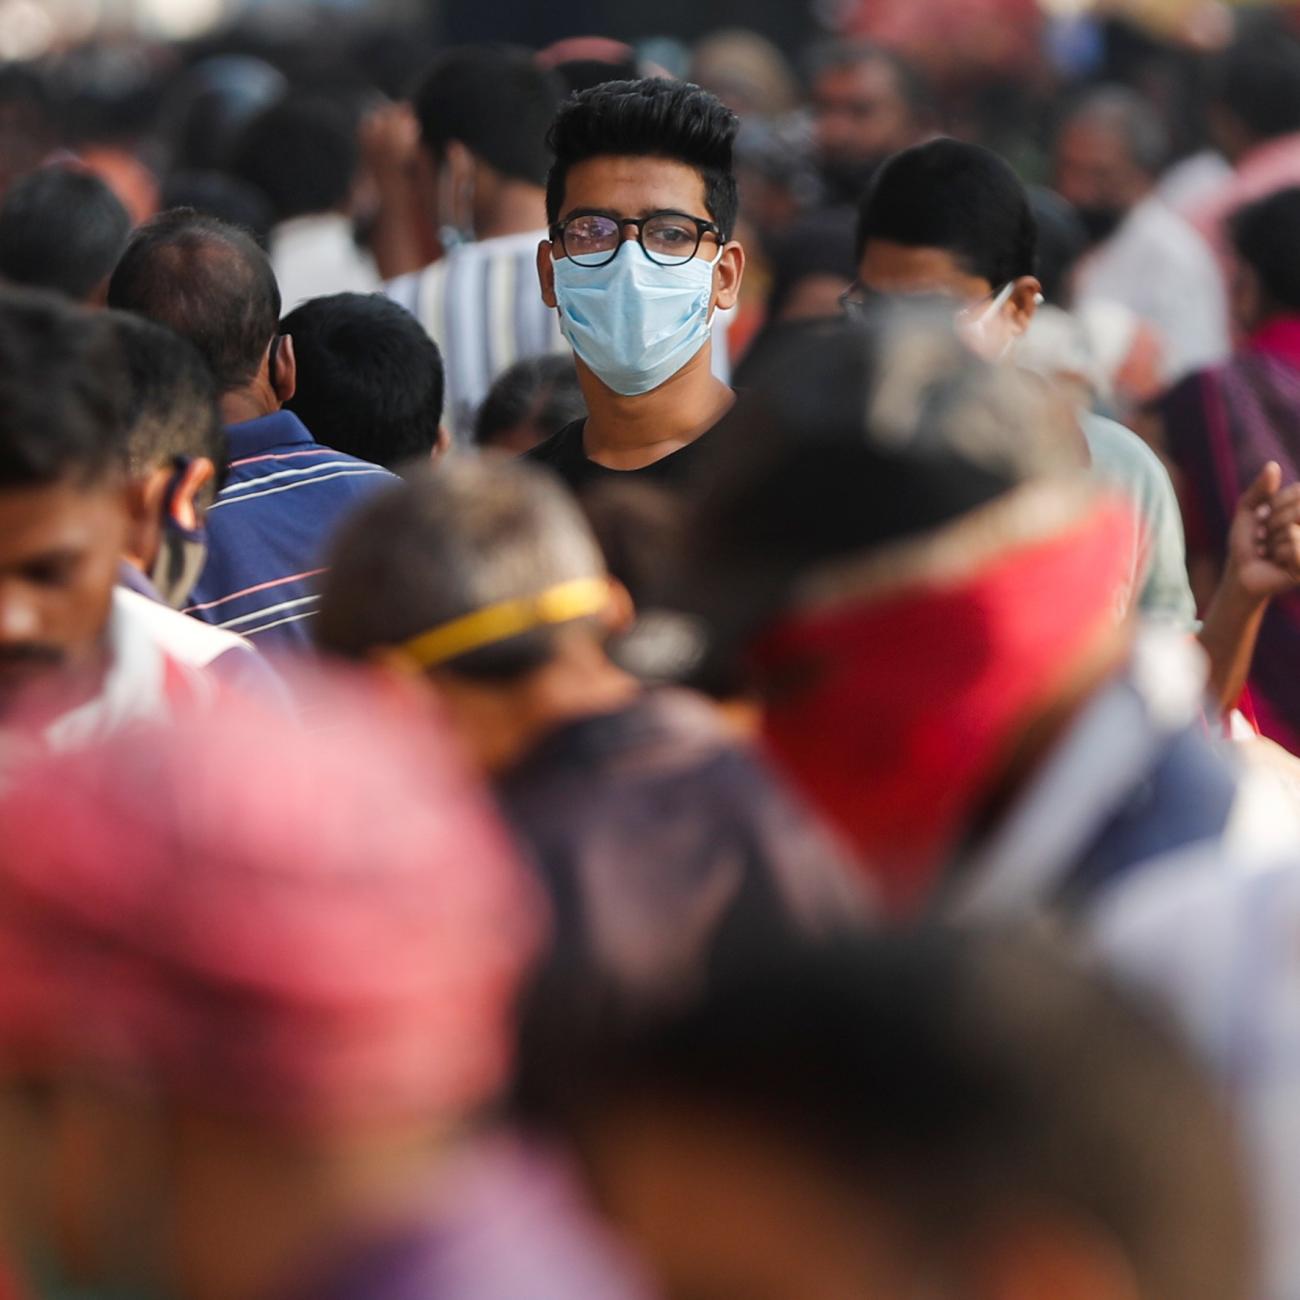 A man wearing a protective mask is seen among people at a crowded market amid the spread of COVID-19.